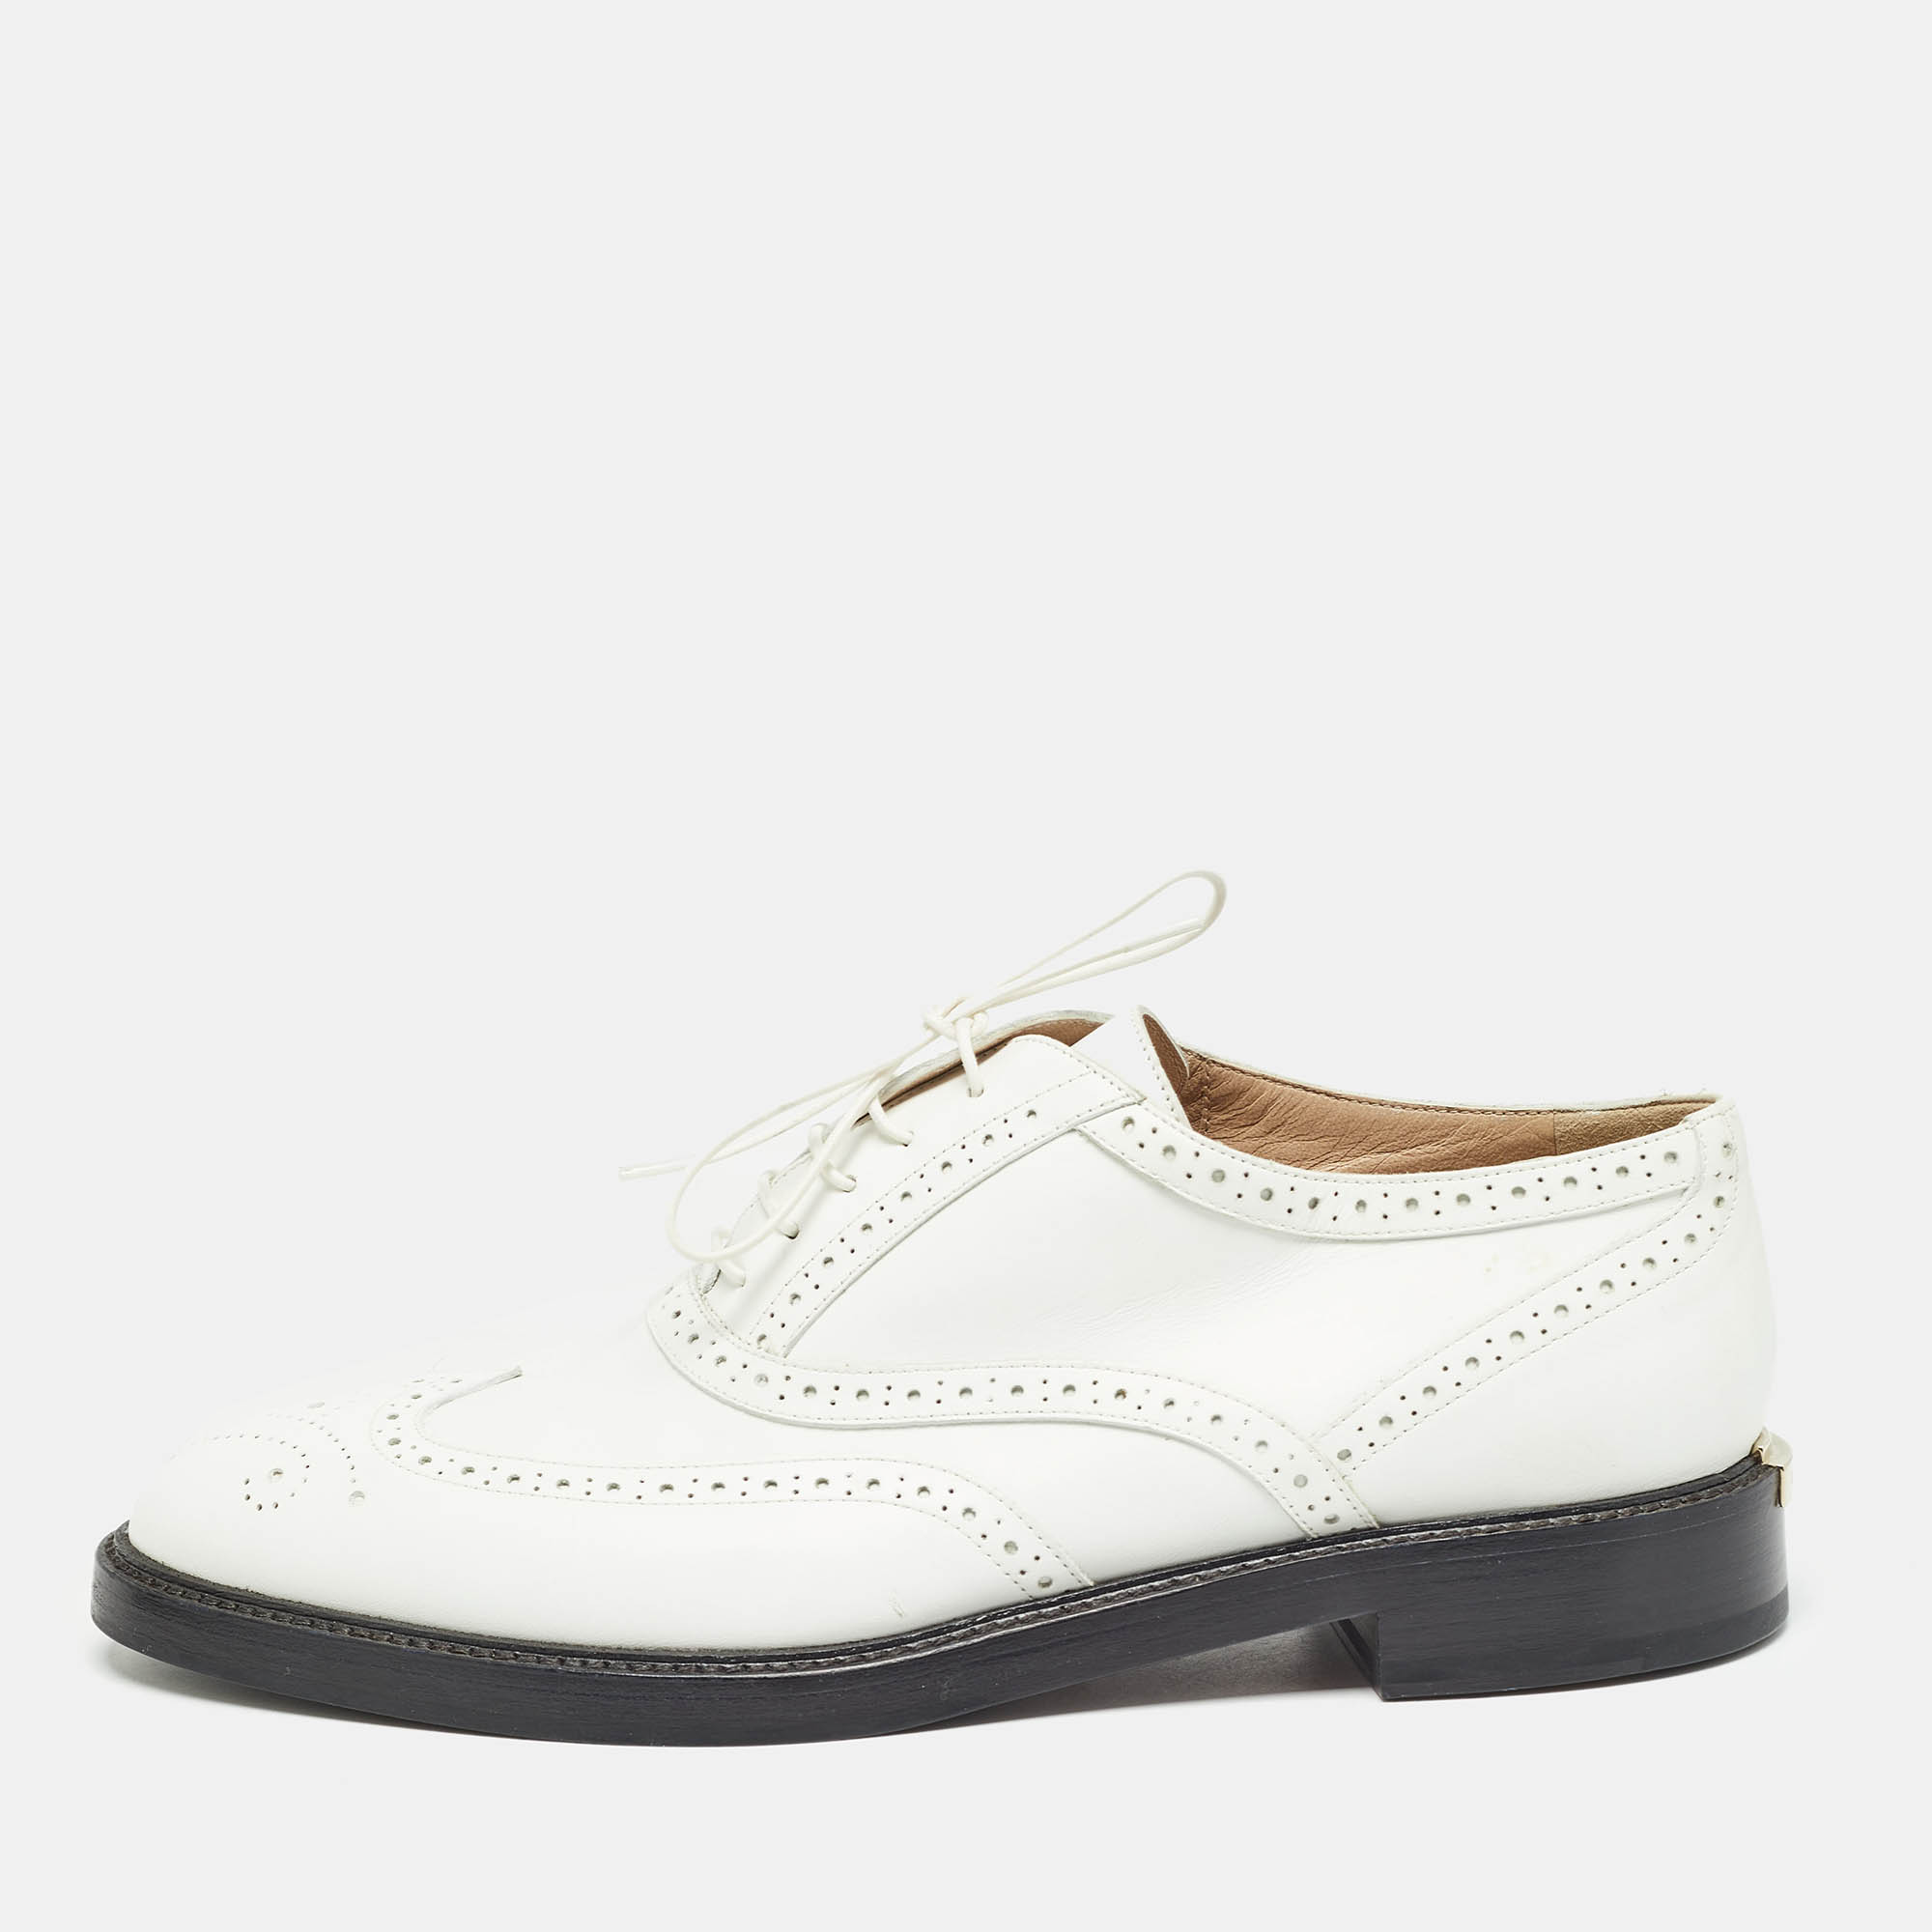 Burberry white brogue leather gennie lace up oxfords size 40